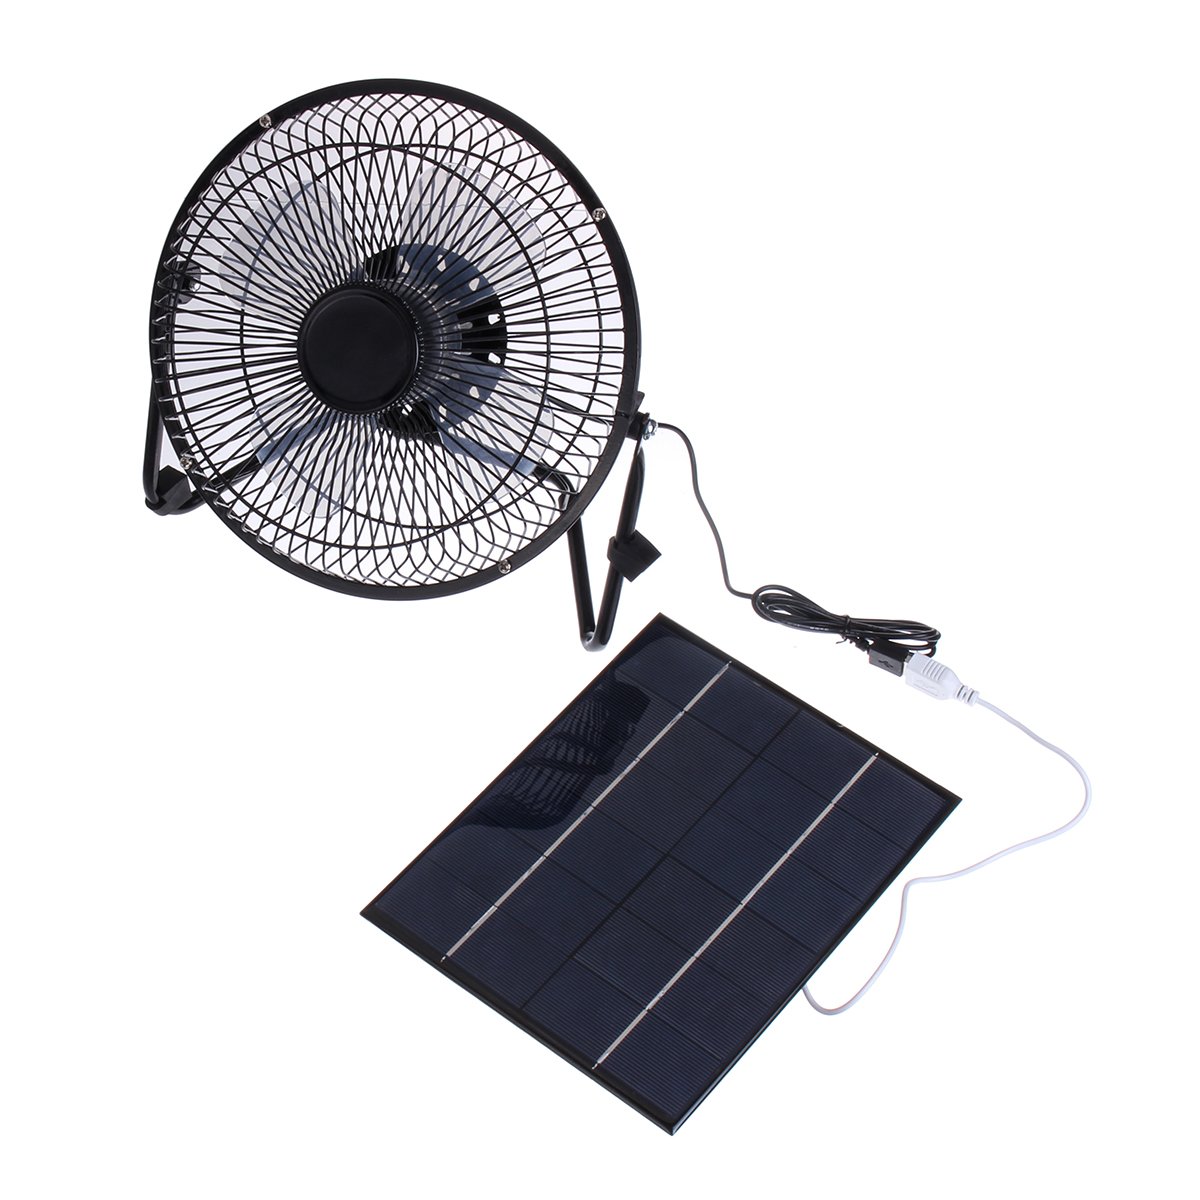 6V 6W 8 Inch Ultra-quiet USB Mini Solar Panel Fan For Outdoor Camping 2